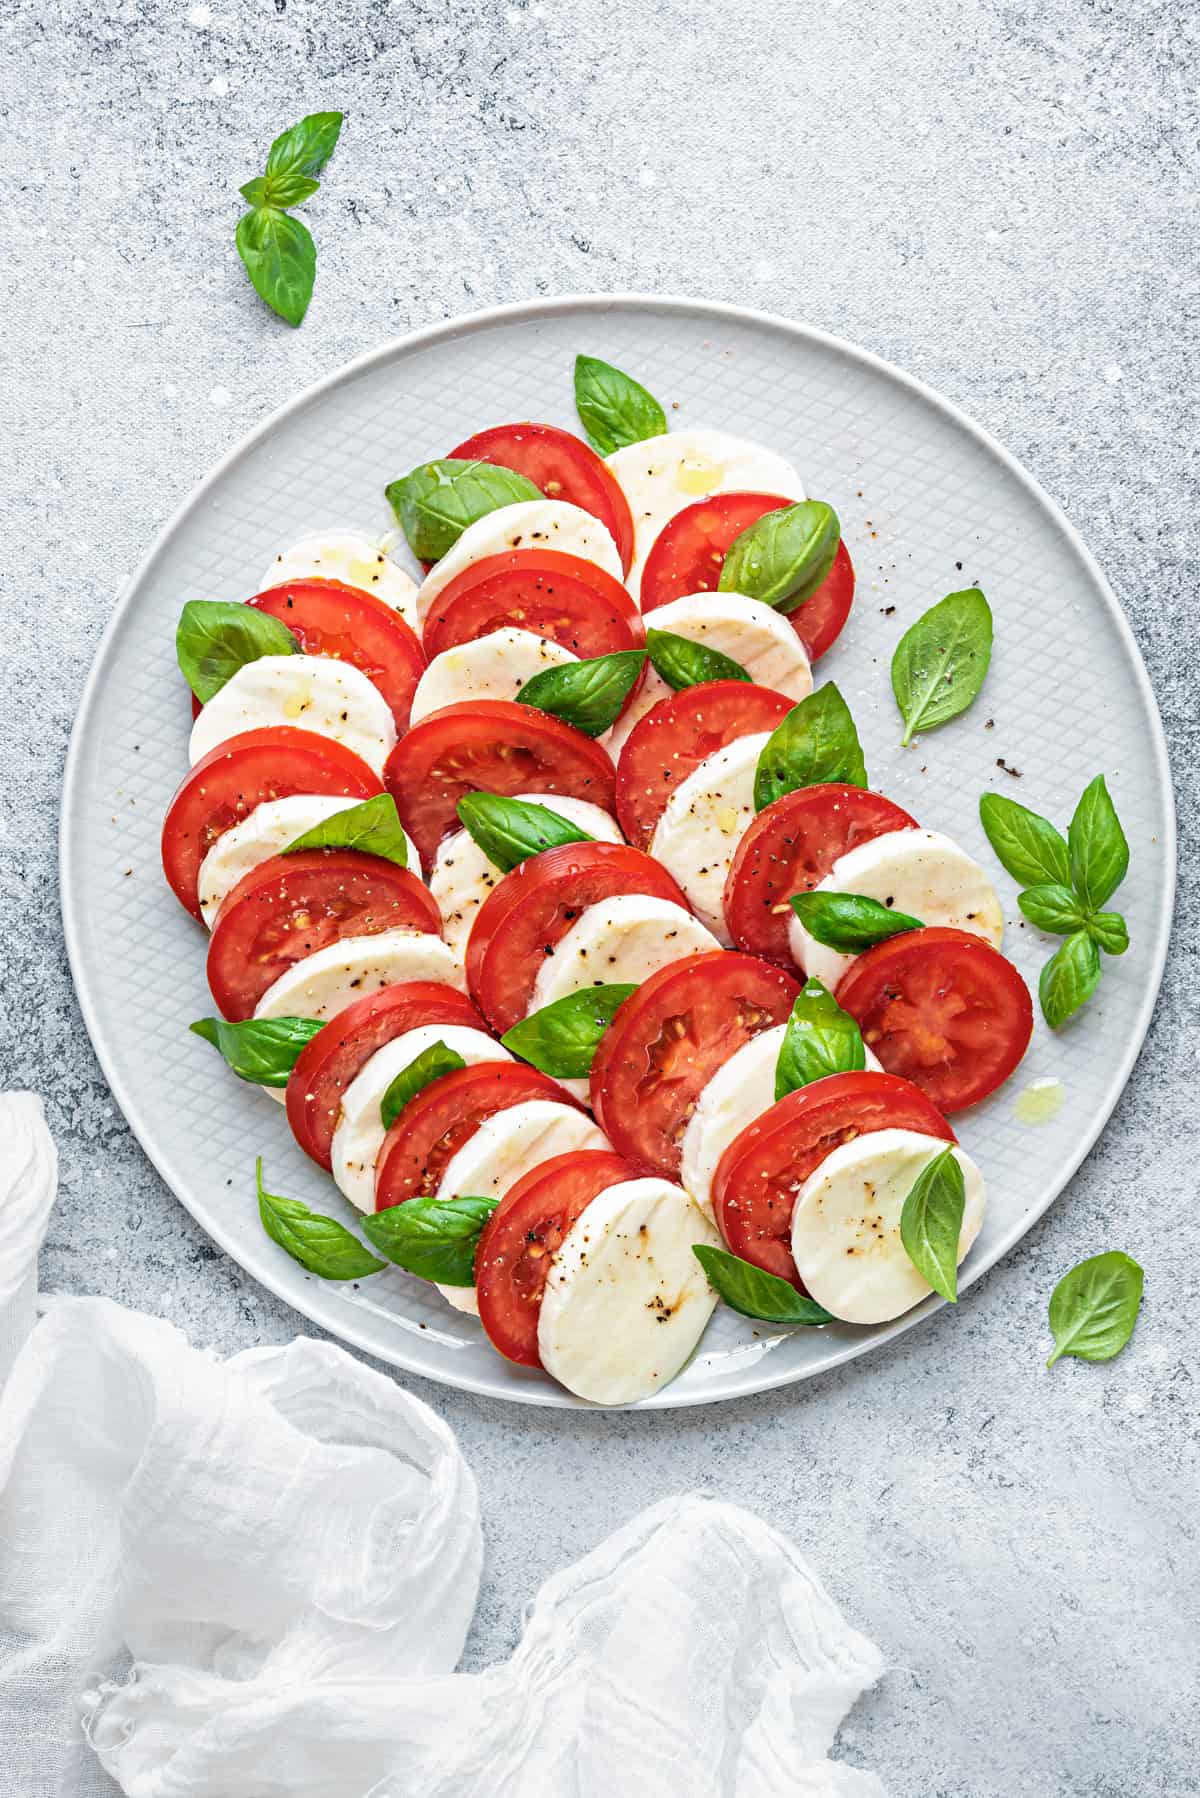 Top down view Caprese salad with tomato, mozzarella, and basil on a light gray plate.